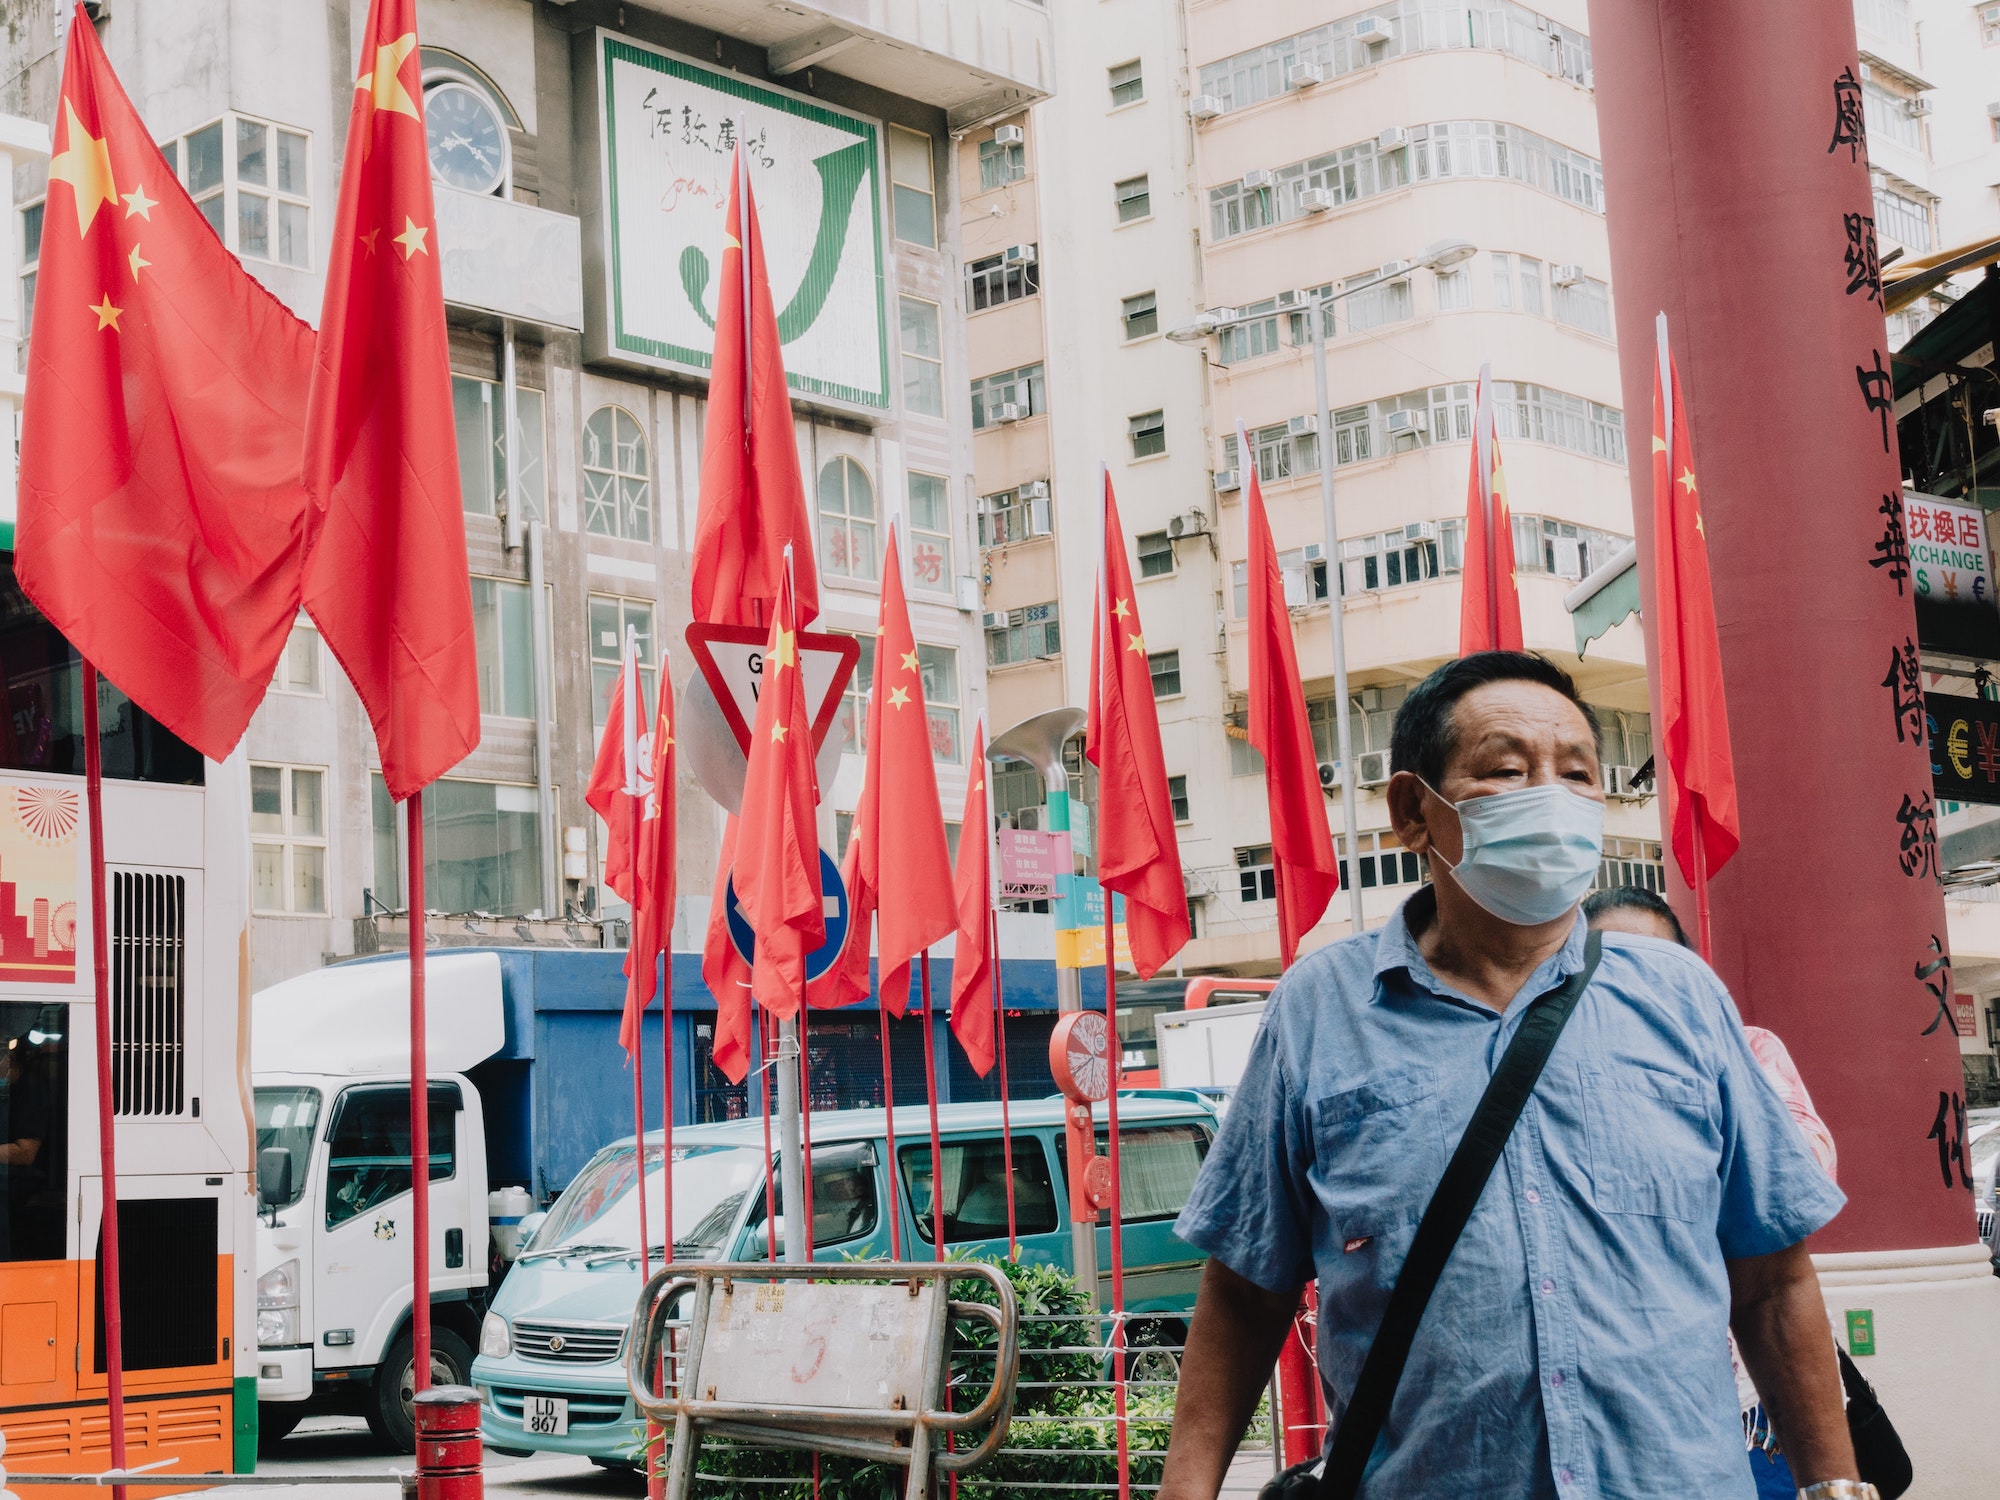 Chinese man wearing COVID-19 mask walking down city street in China with national flags behind him